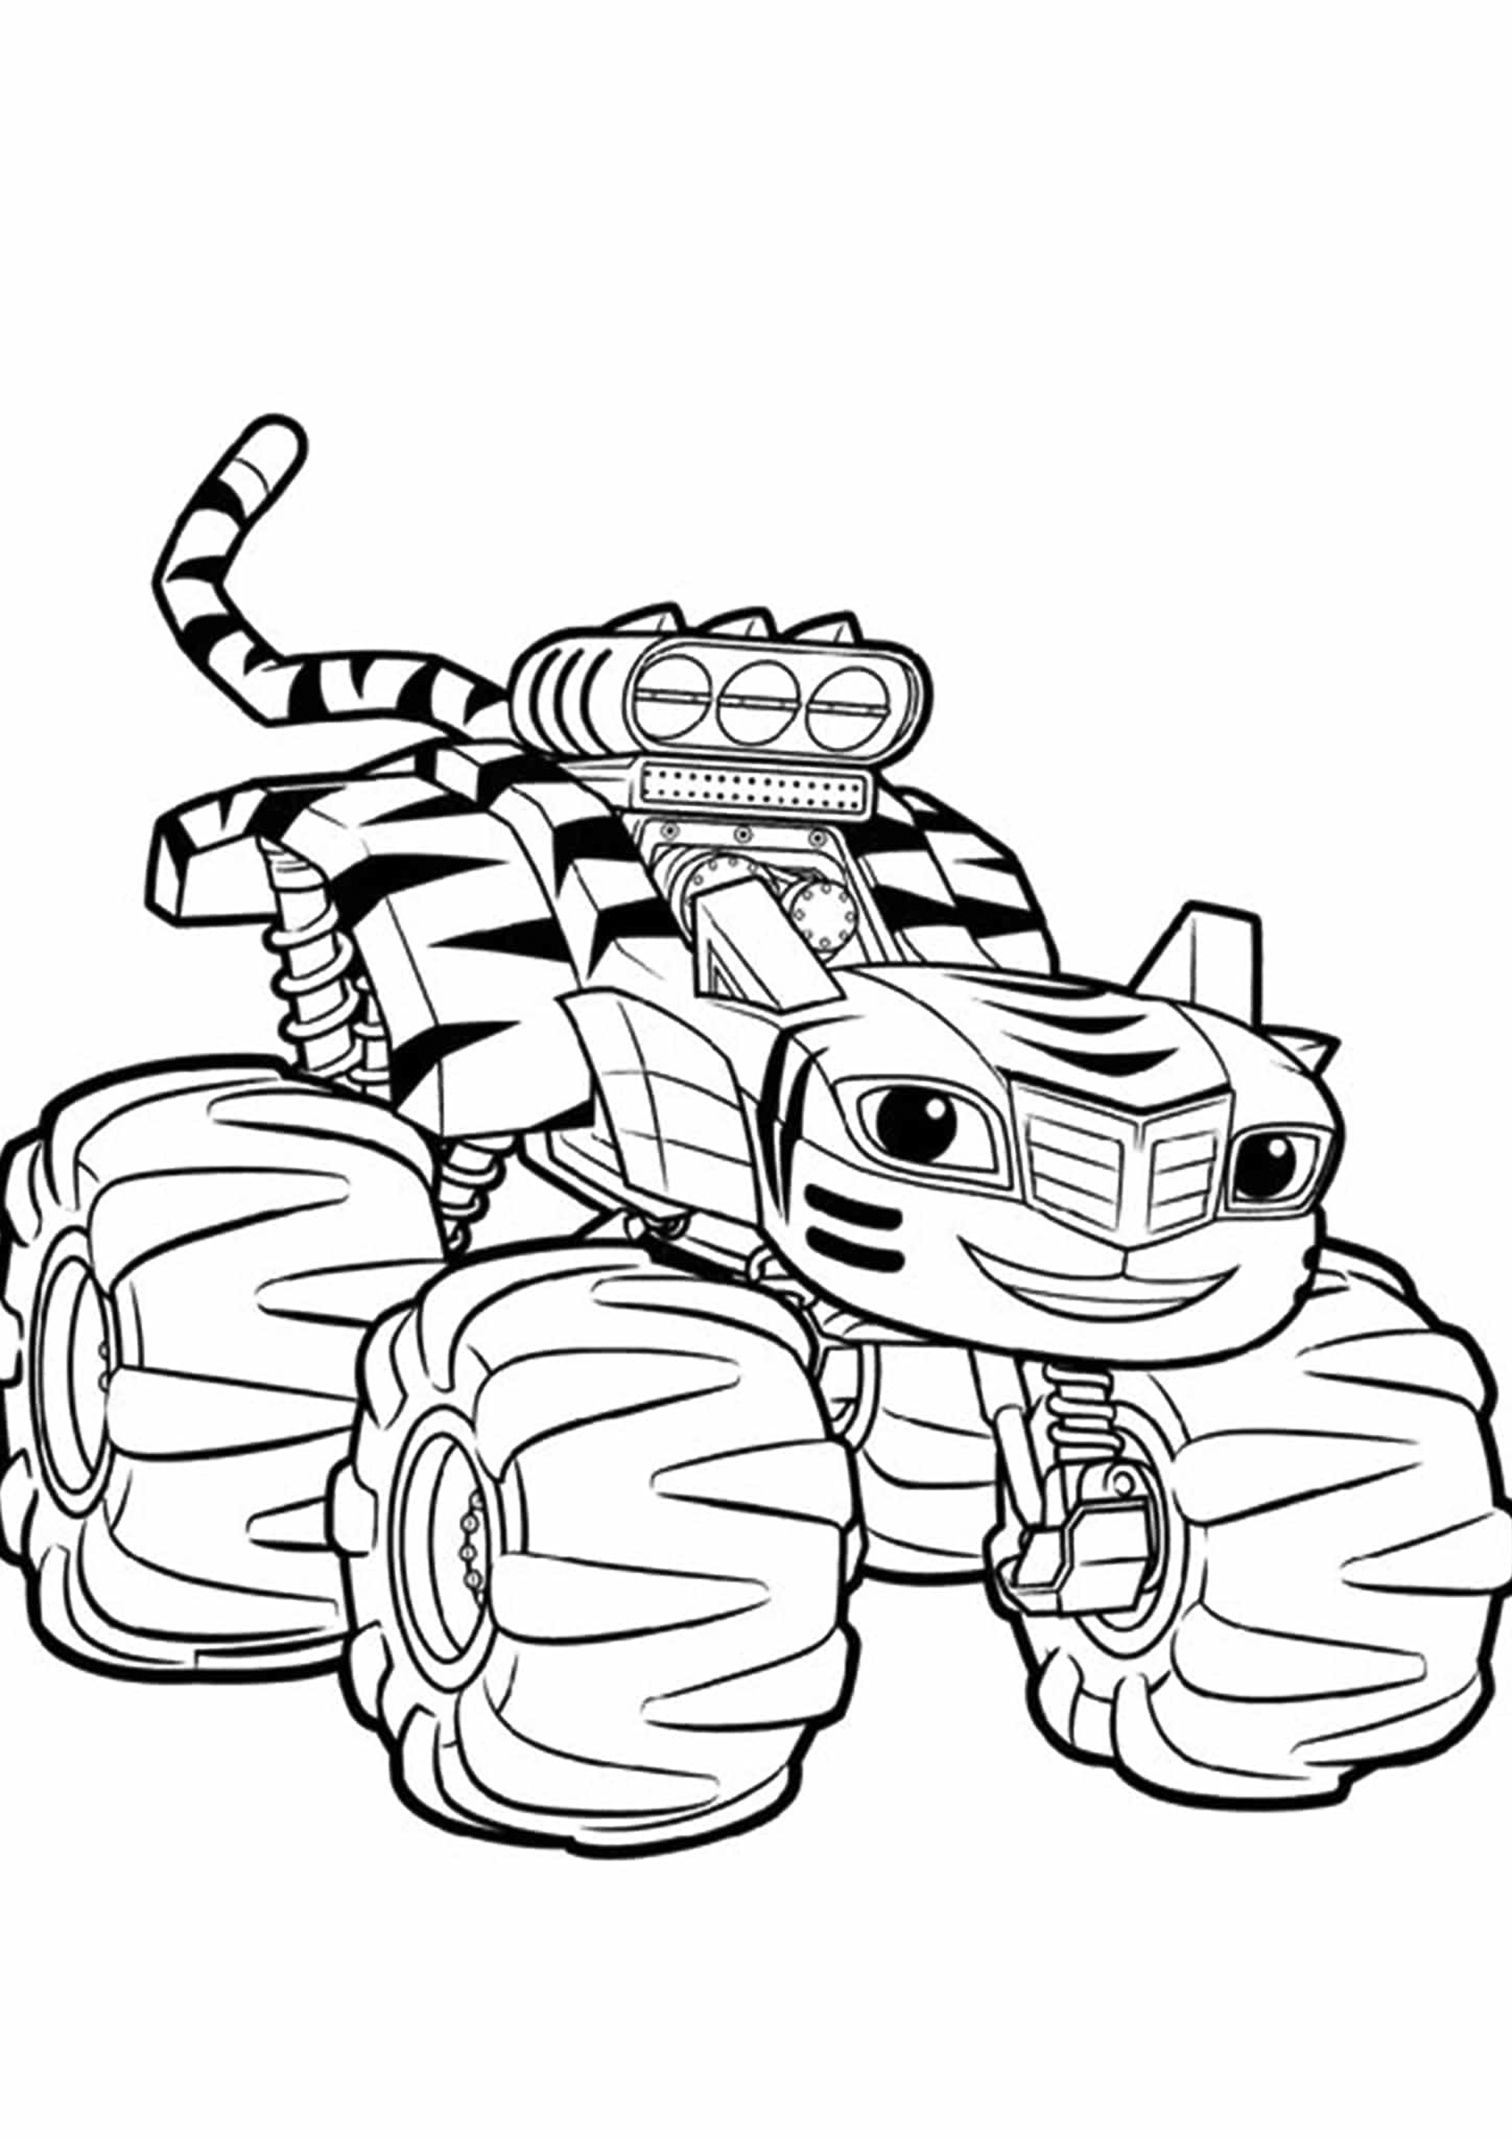 110+ Monster Truck Coloring Pages 106